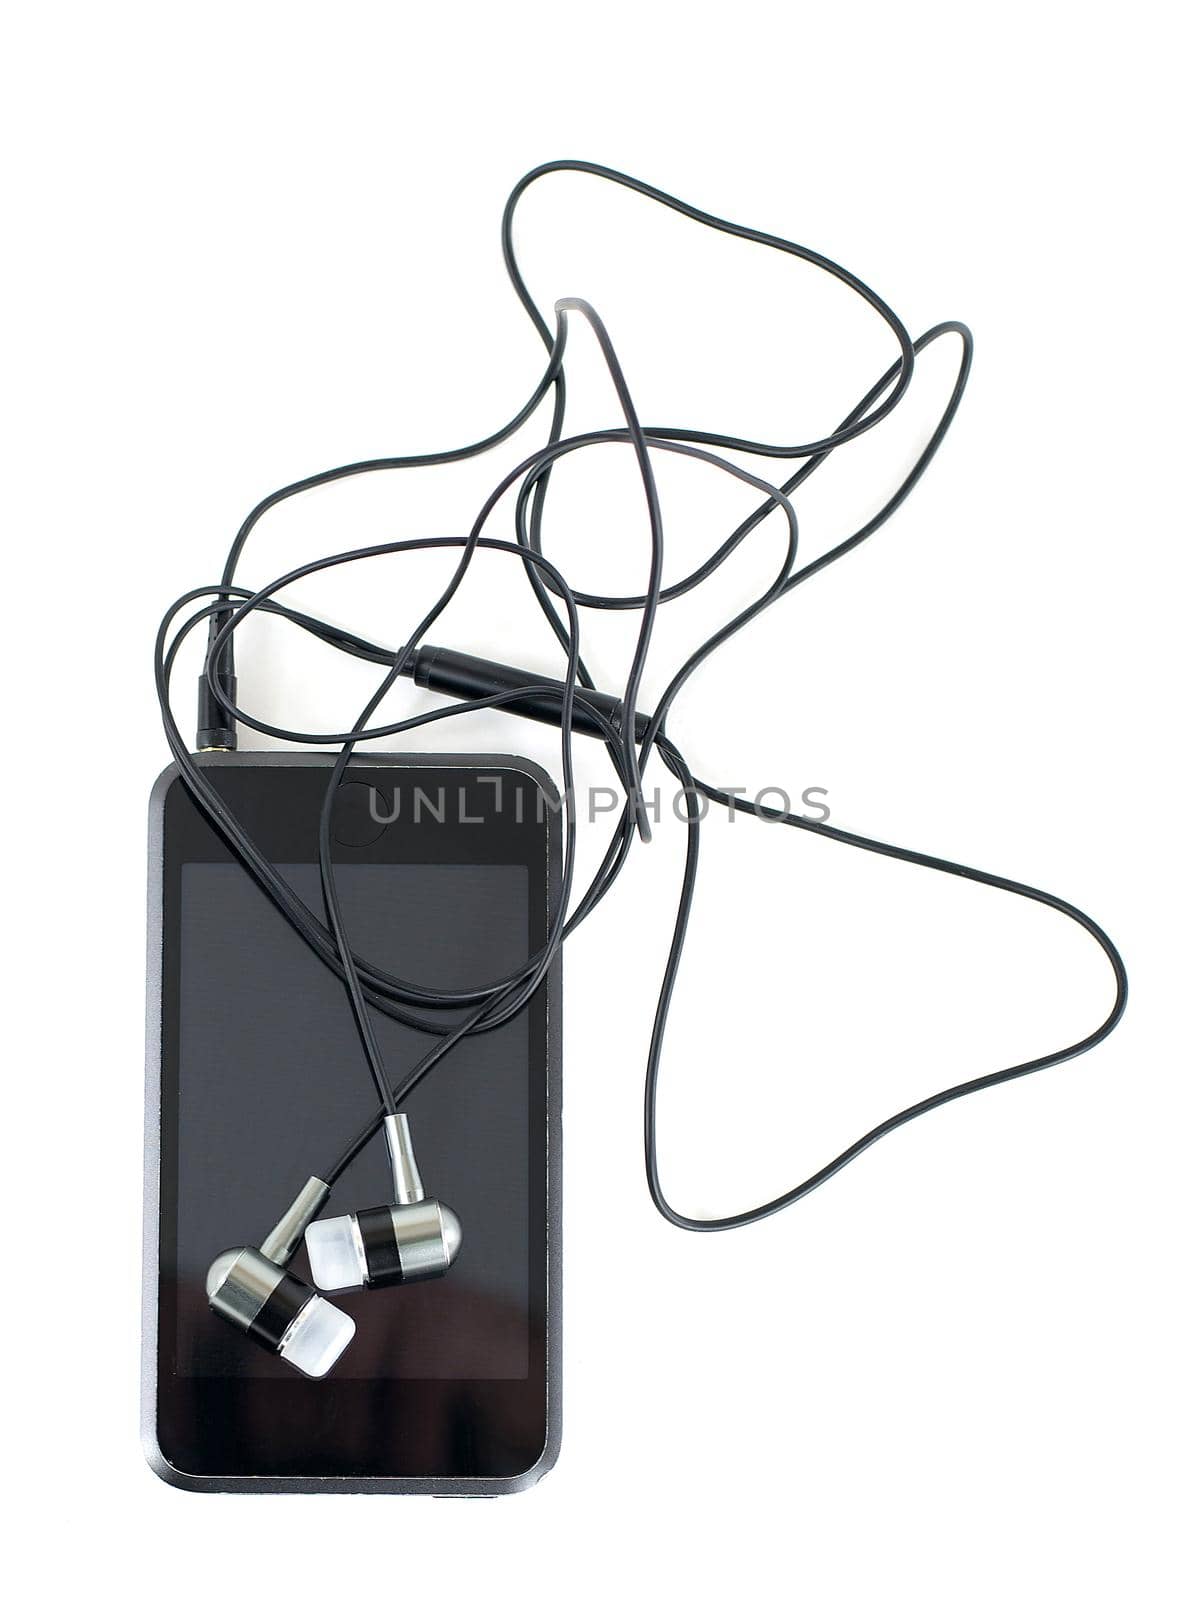 Headphones and media player on a white background. Close up.